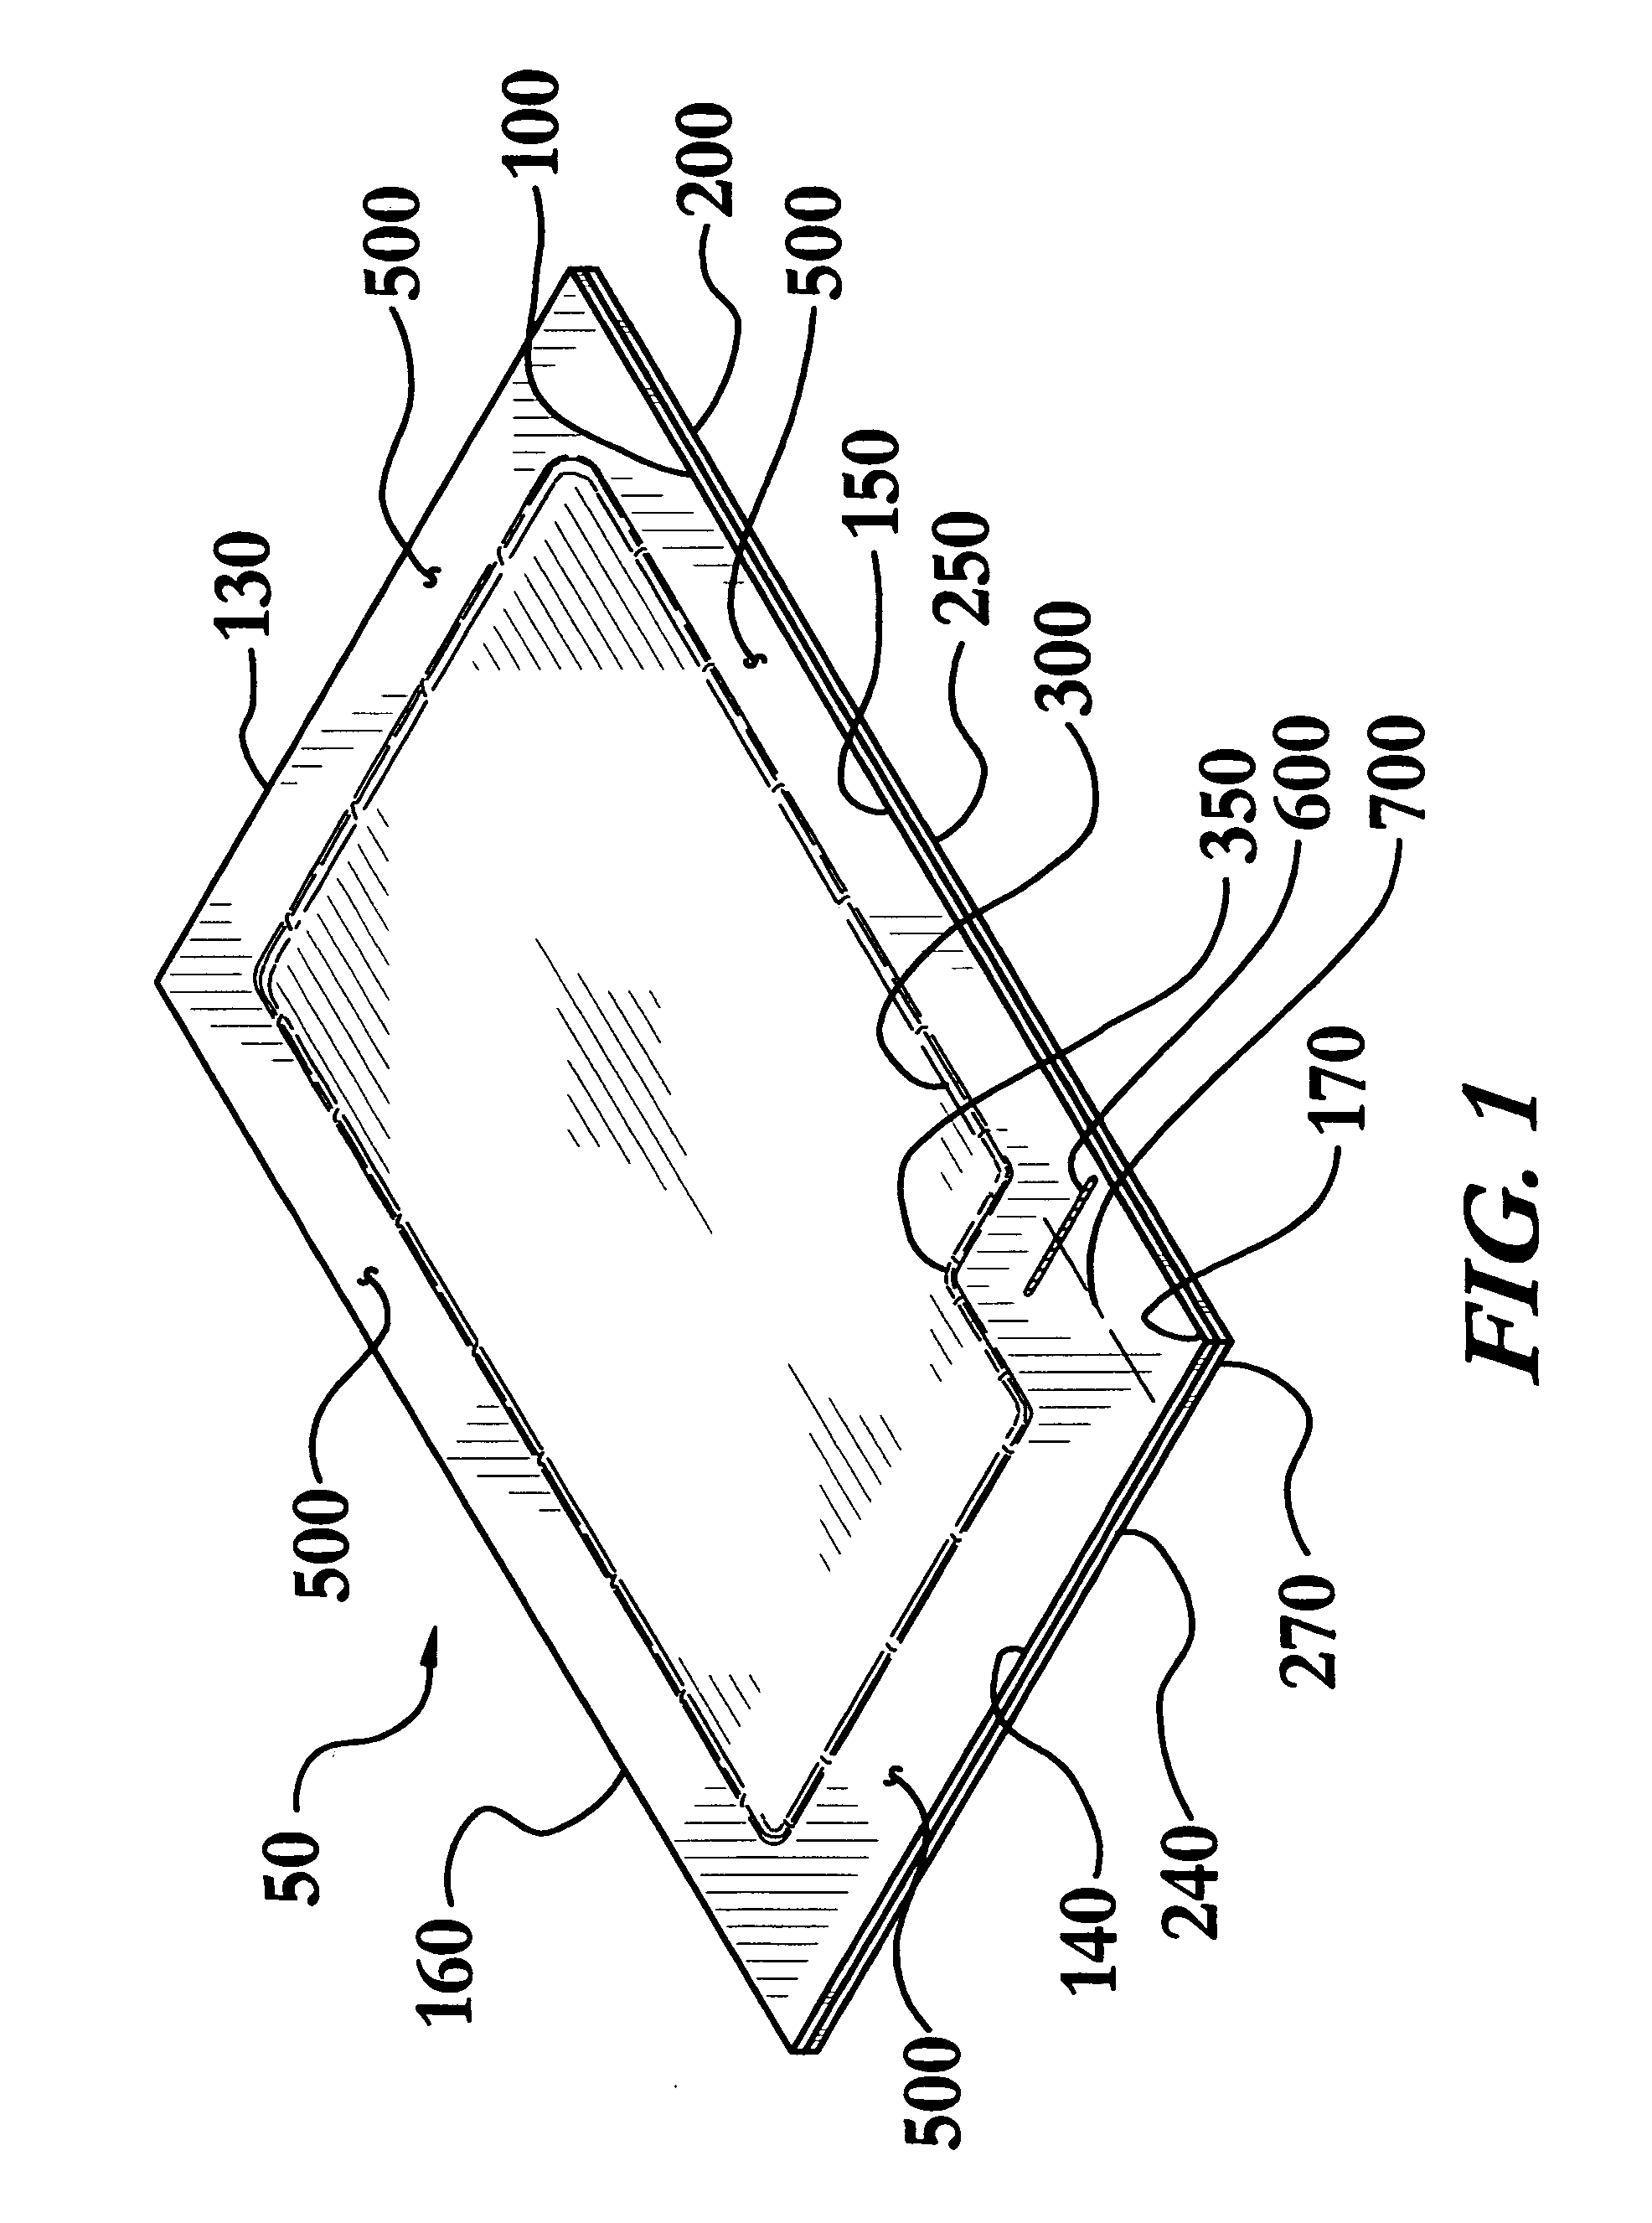 Peelable pouch containing a single or multiple dosage forms and process of making same